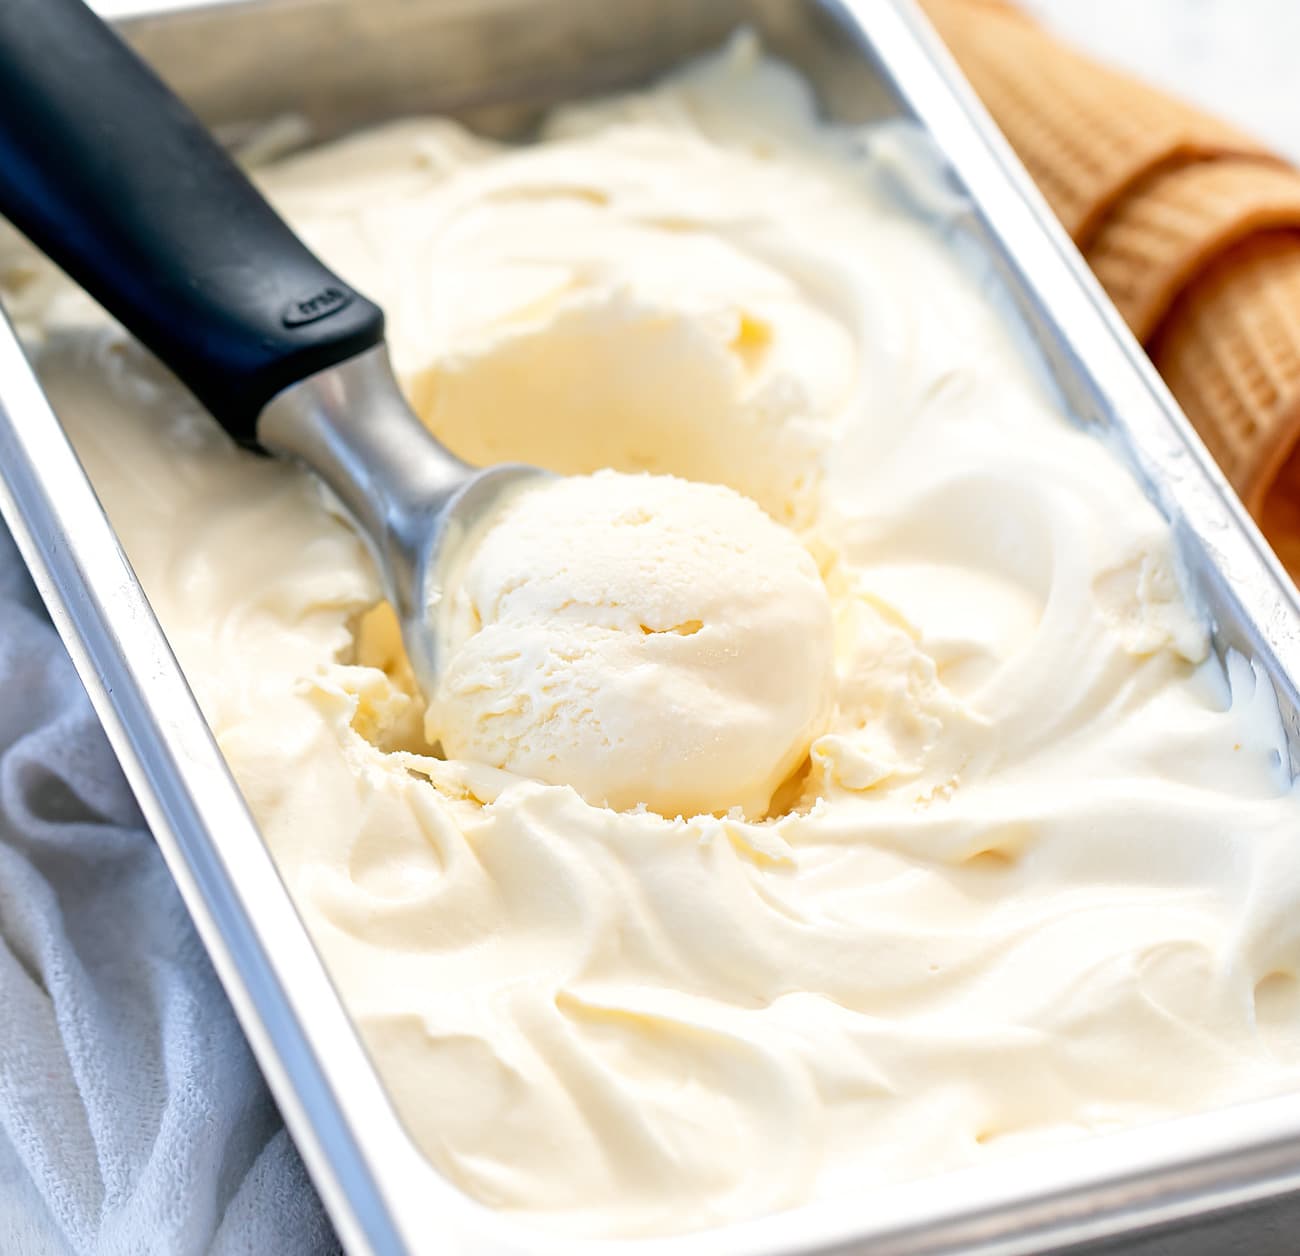 How To Make Ice Cream Without An Ice Cream Maker Easily